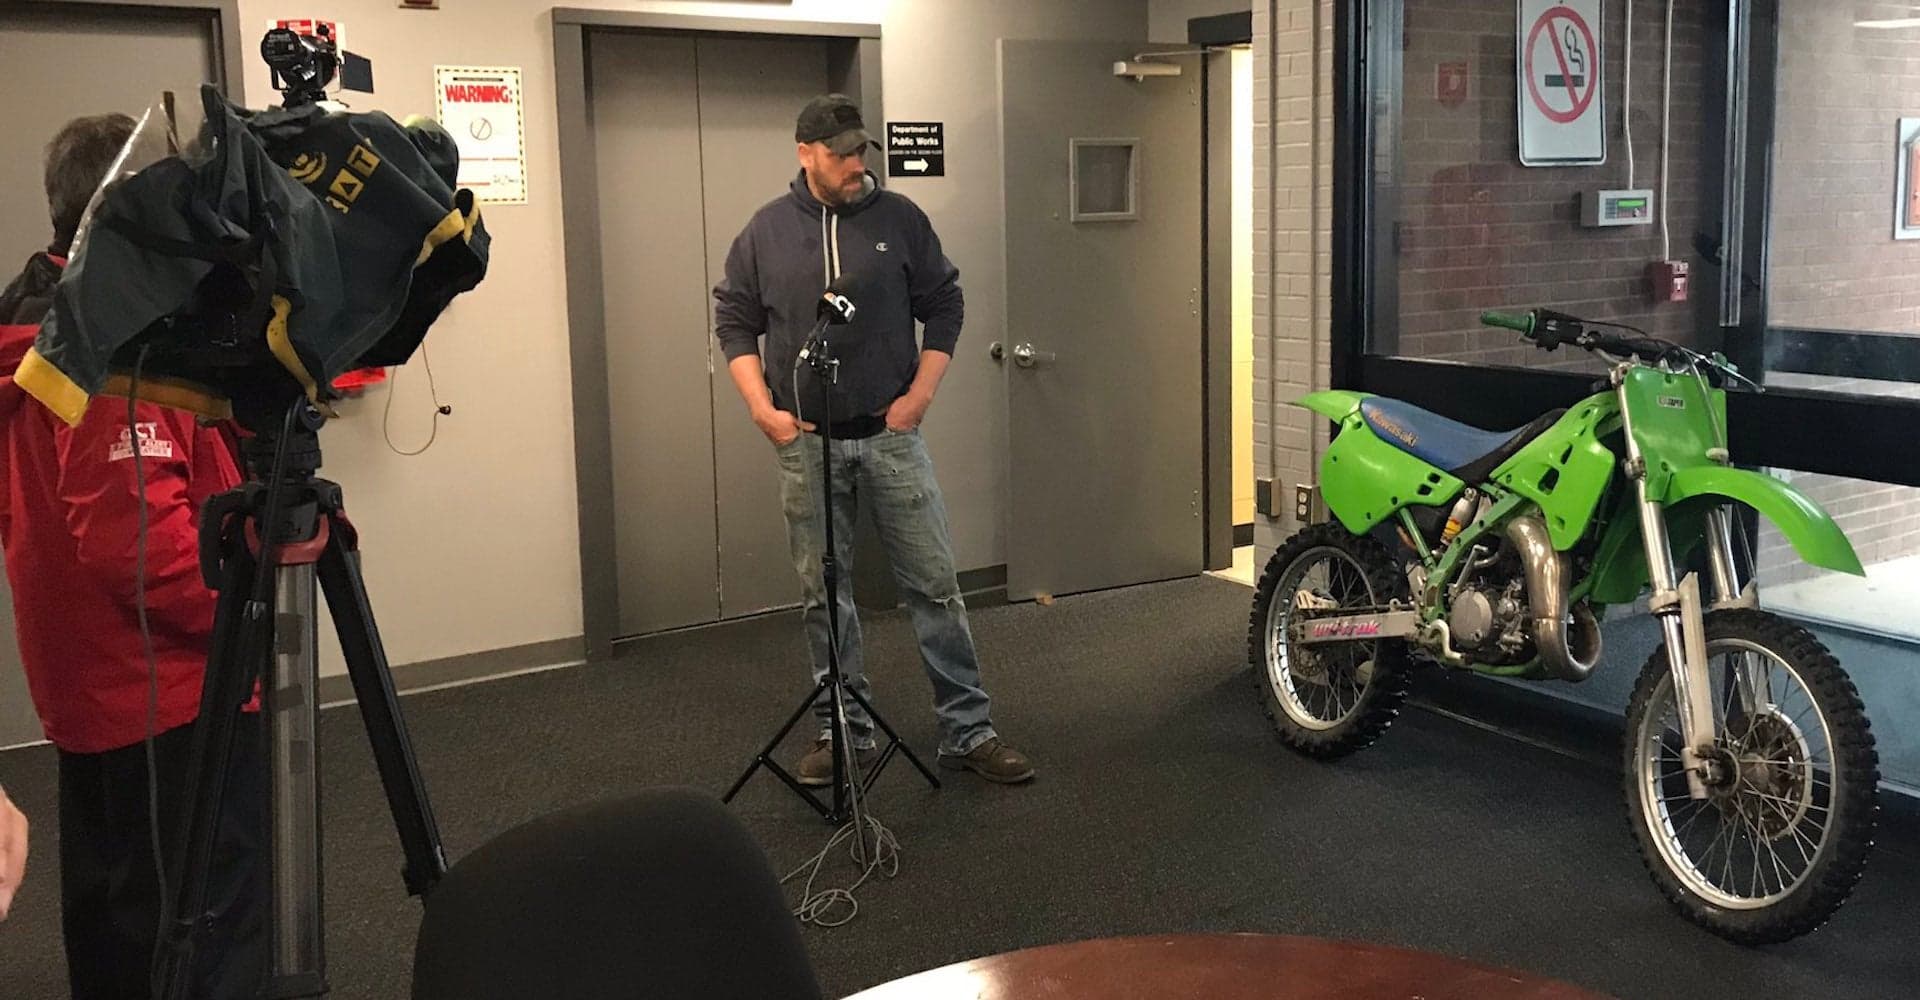 Police Reunite Man With Kawasaki Dirt Bike 27 Years After It Was Stolen